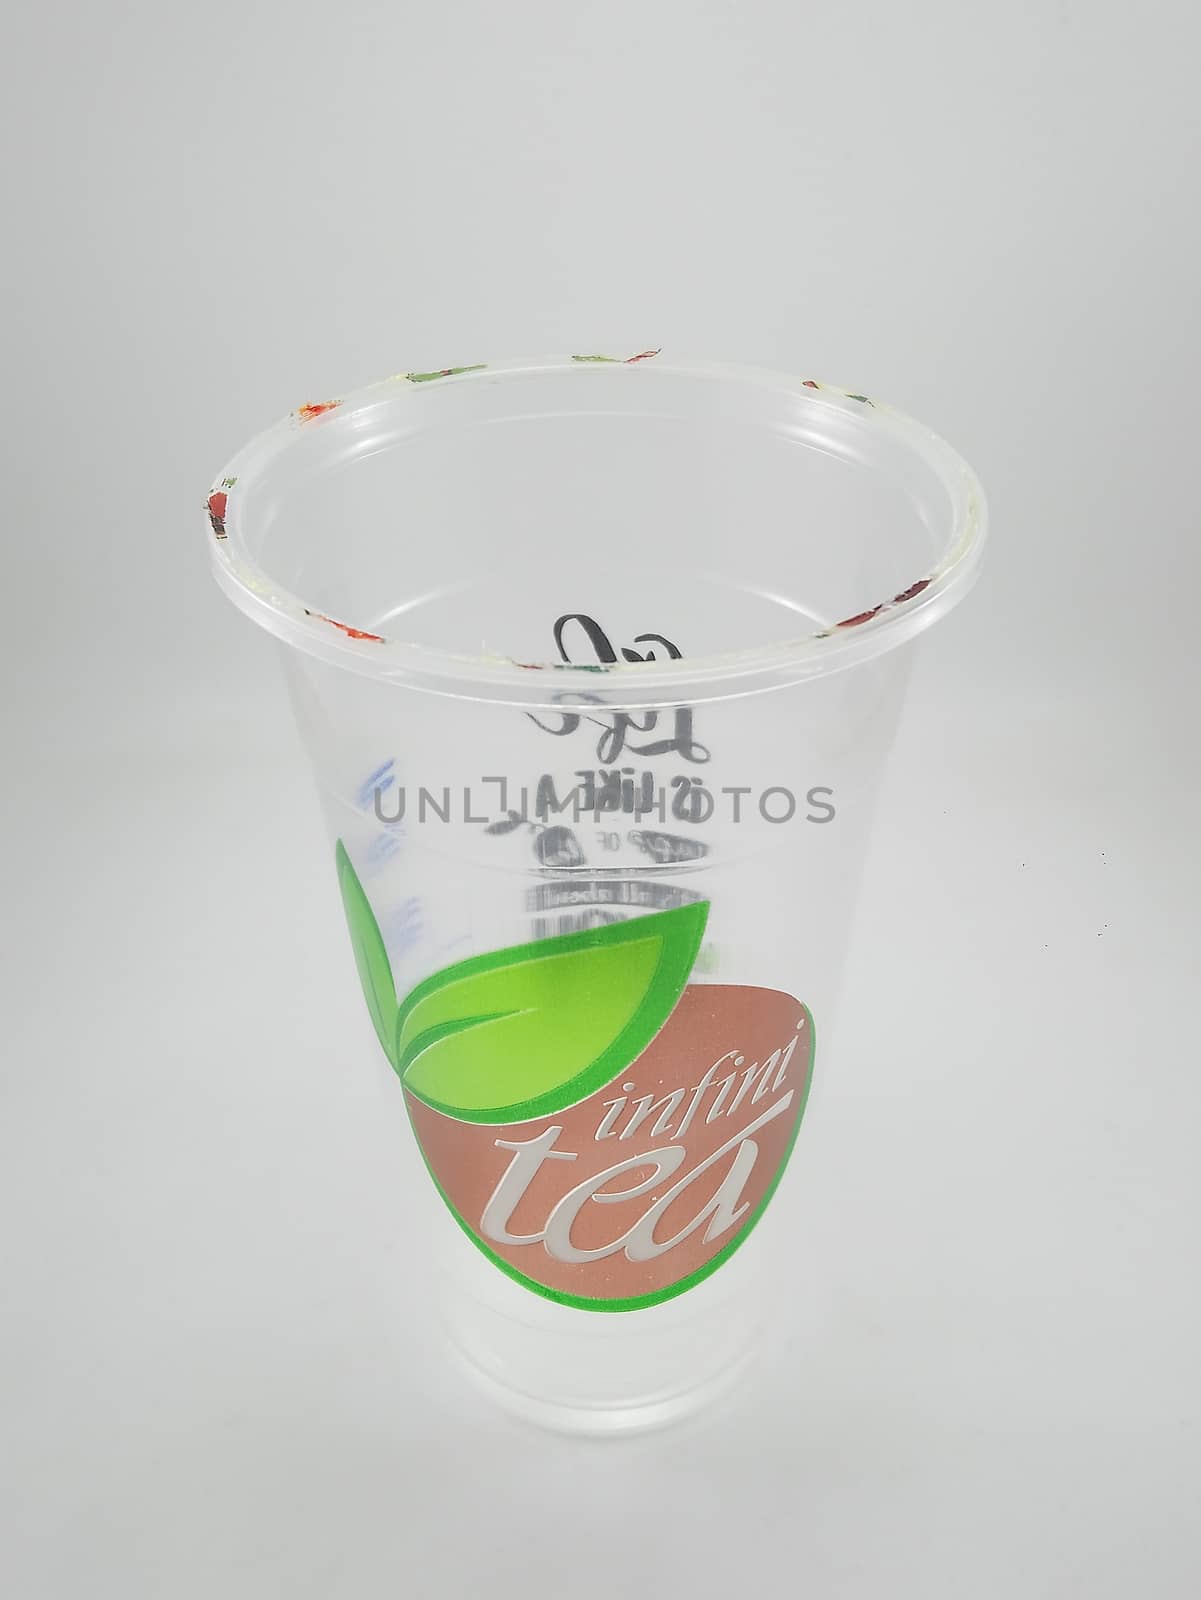 Infinitea drinking cup in Manila, Philippines by imwaltersy